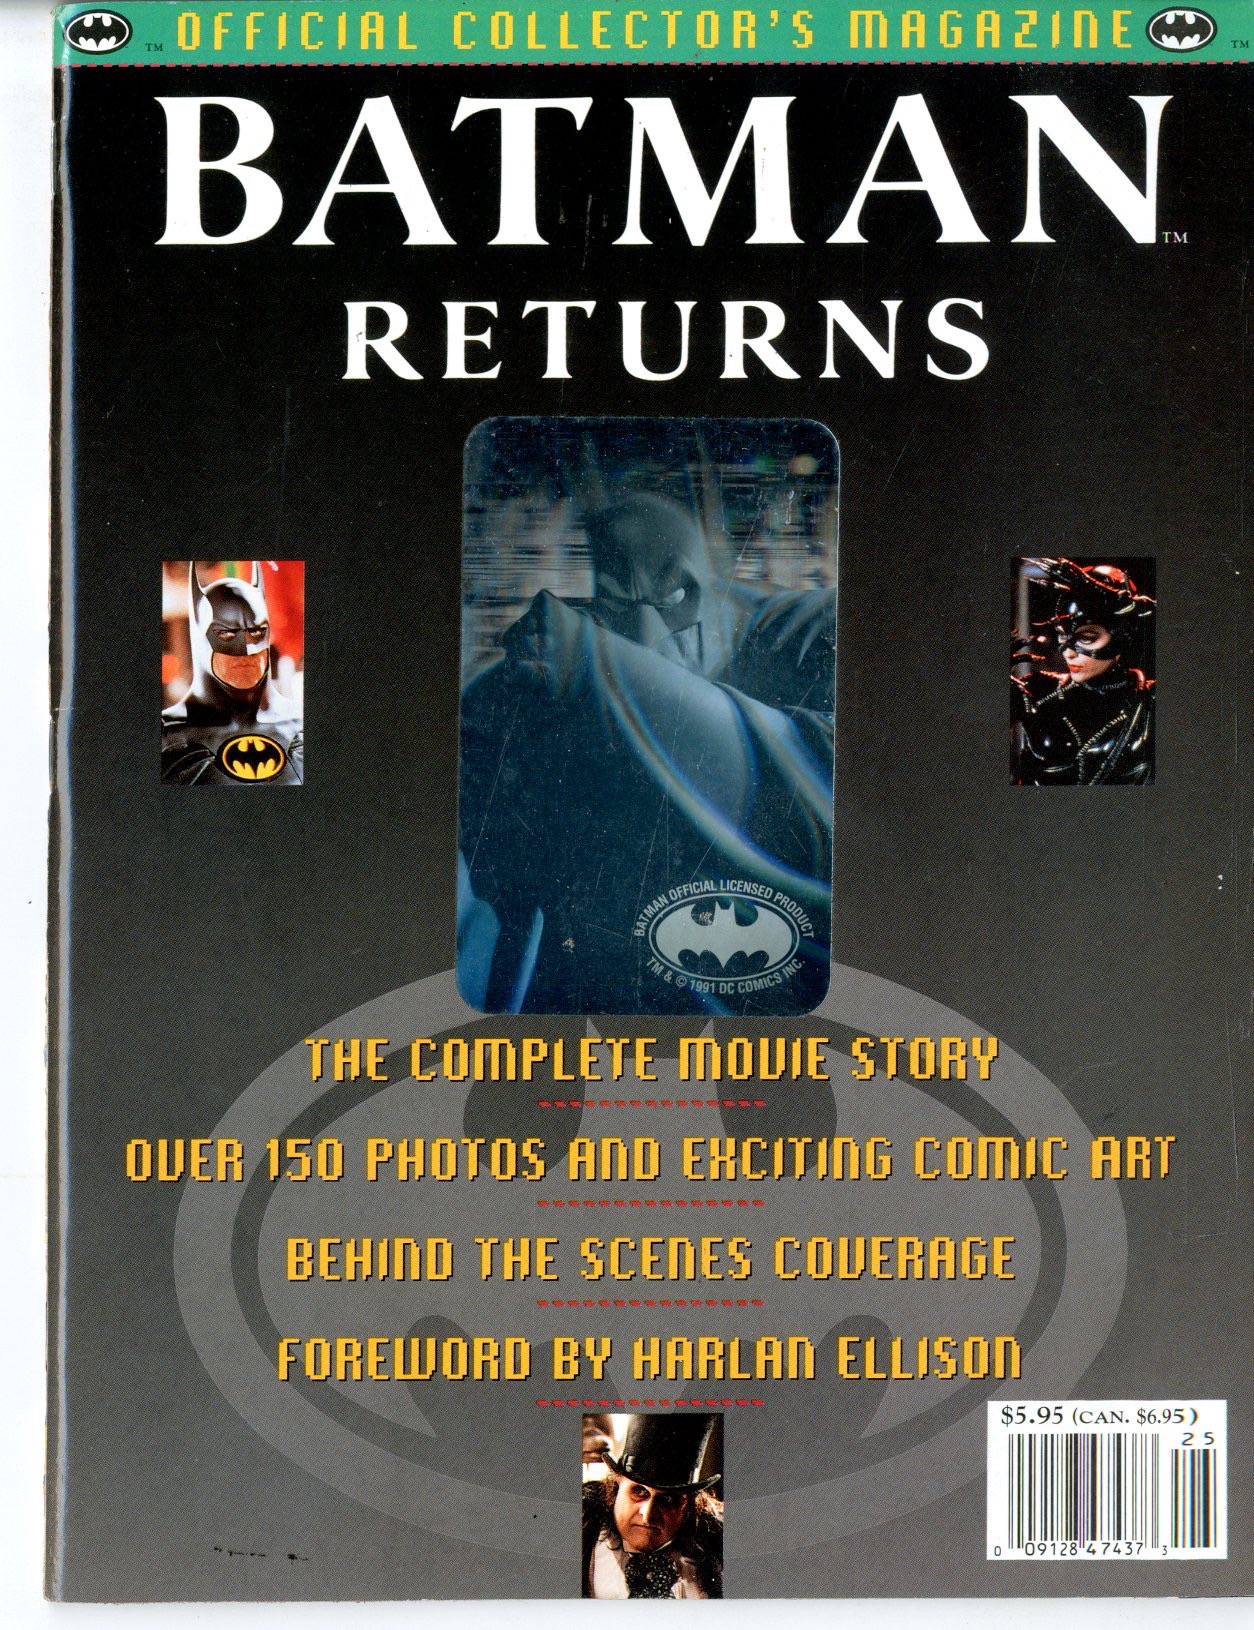 Batman Returns Official Collector’s Magazine - Primary